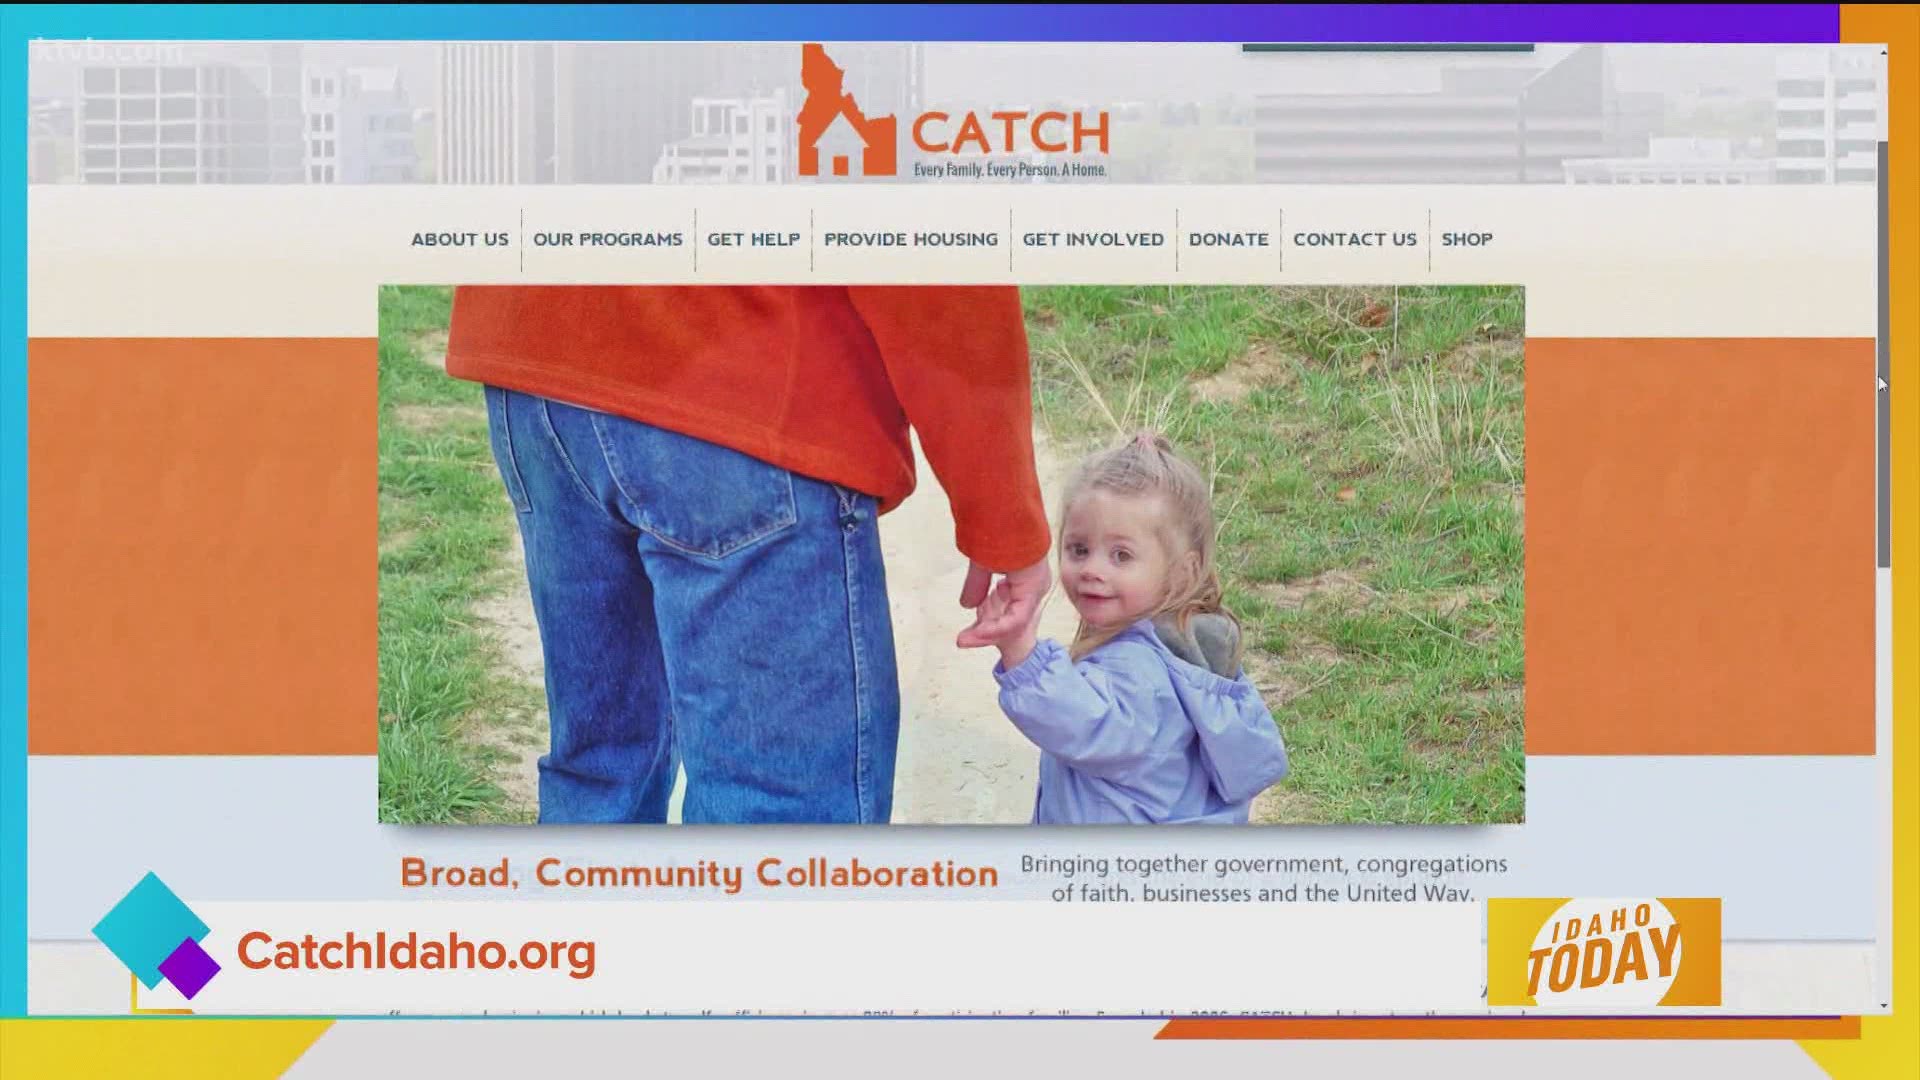 Stephanie Day, Executive Director of Catch  discusses providing housing assistance to those in need